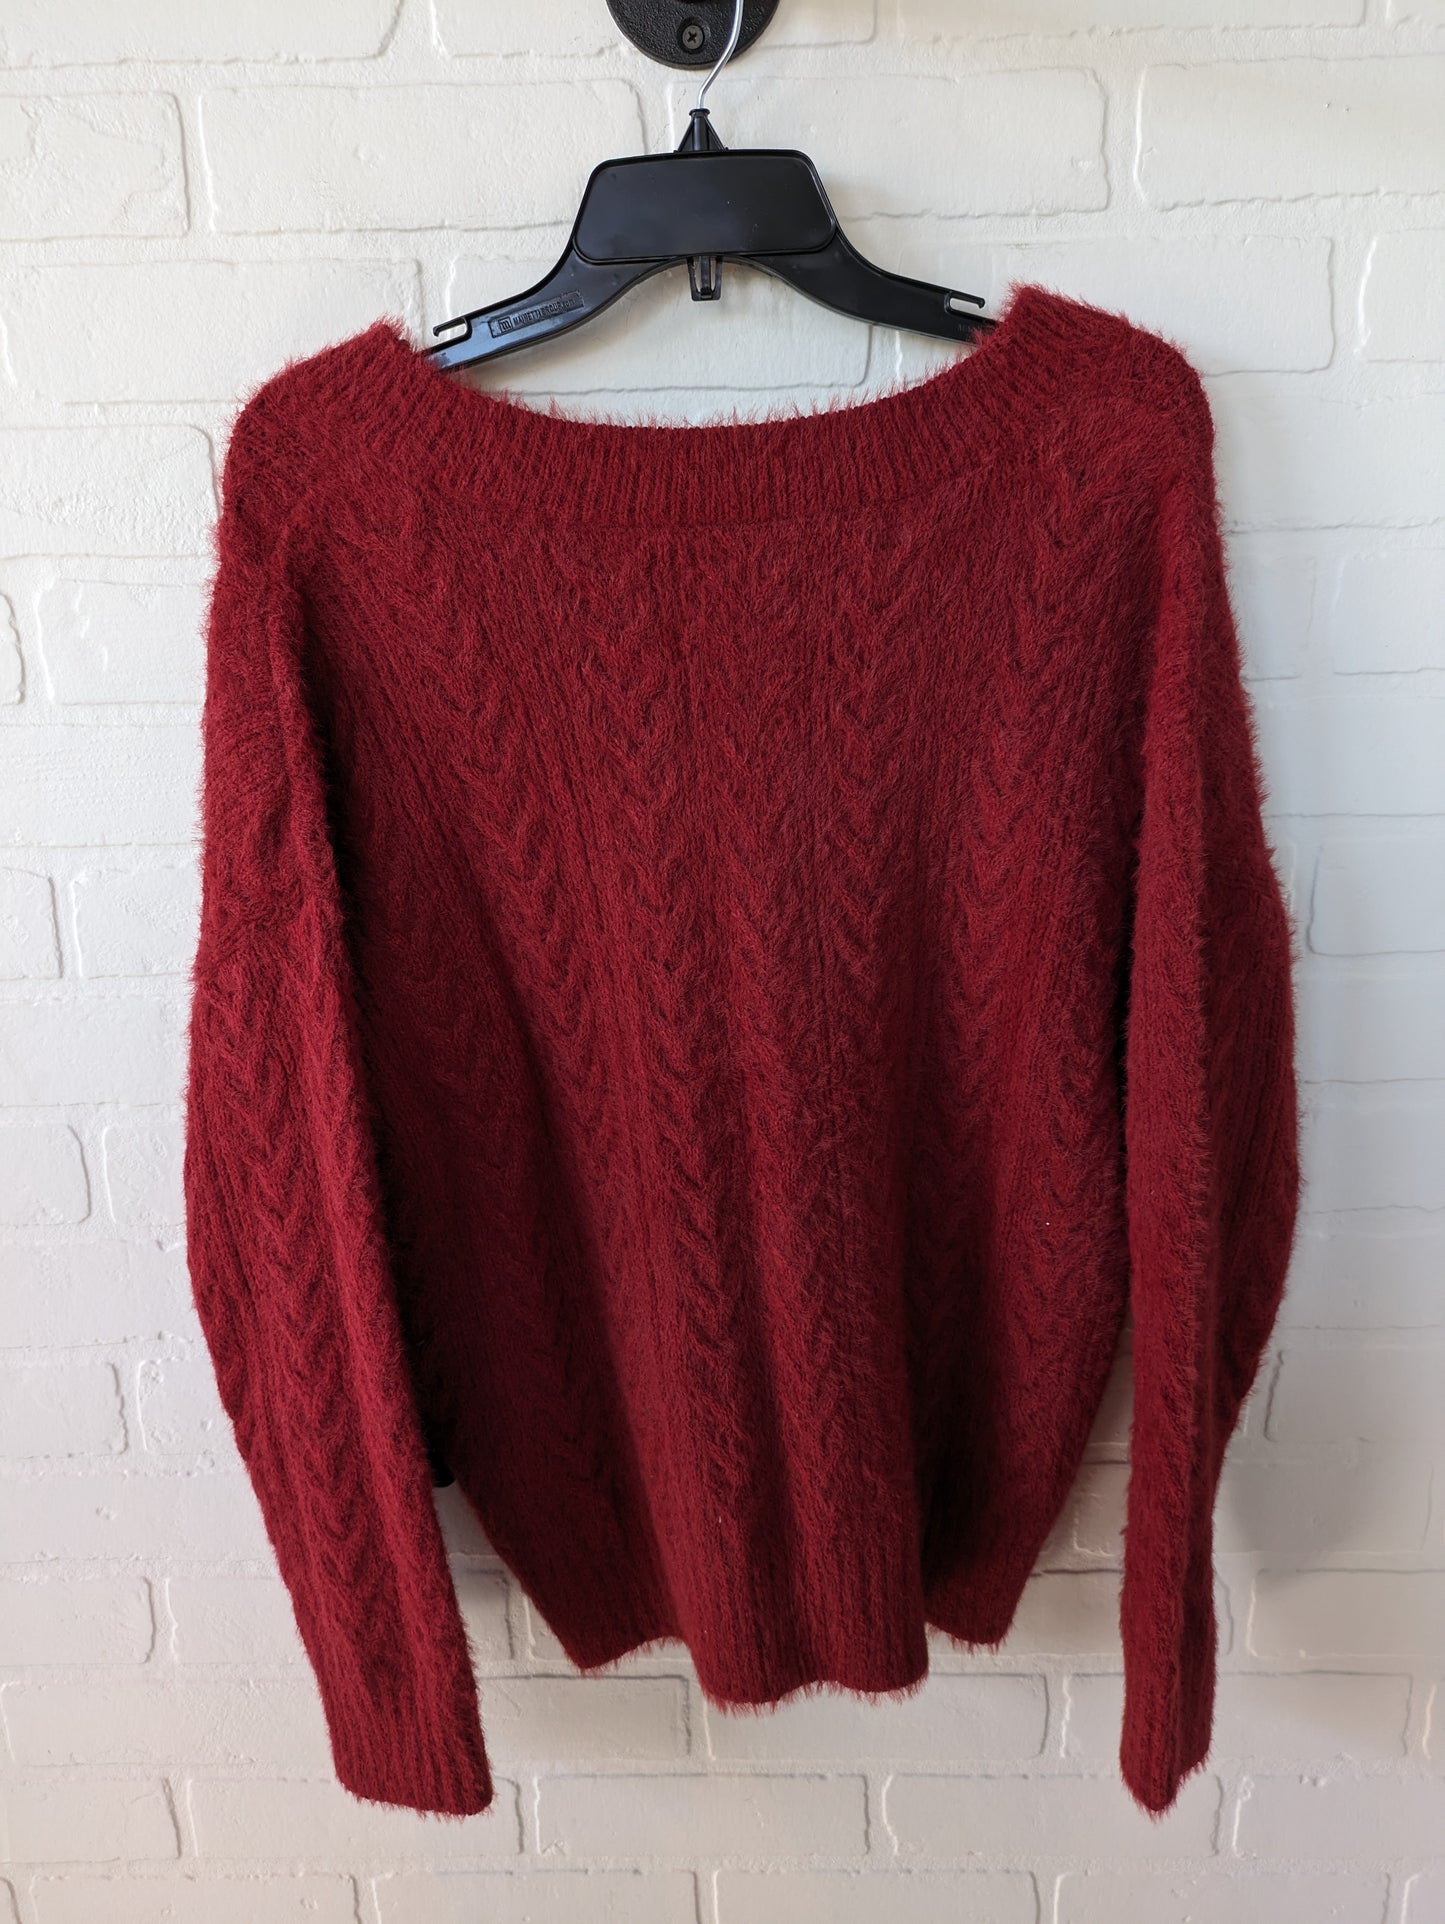 Sweater By Lucky Brand  Size: S